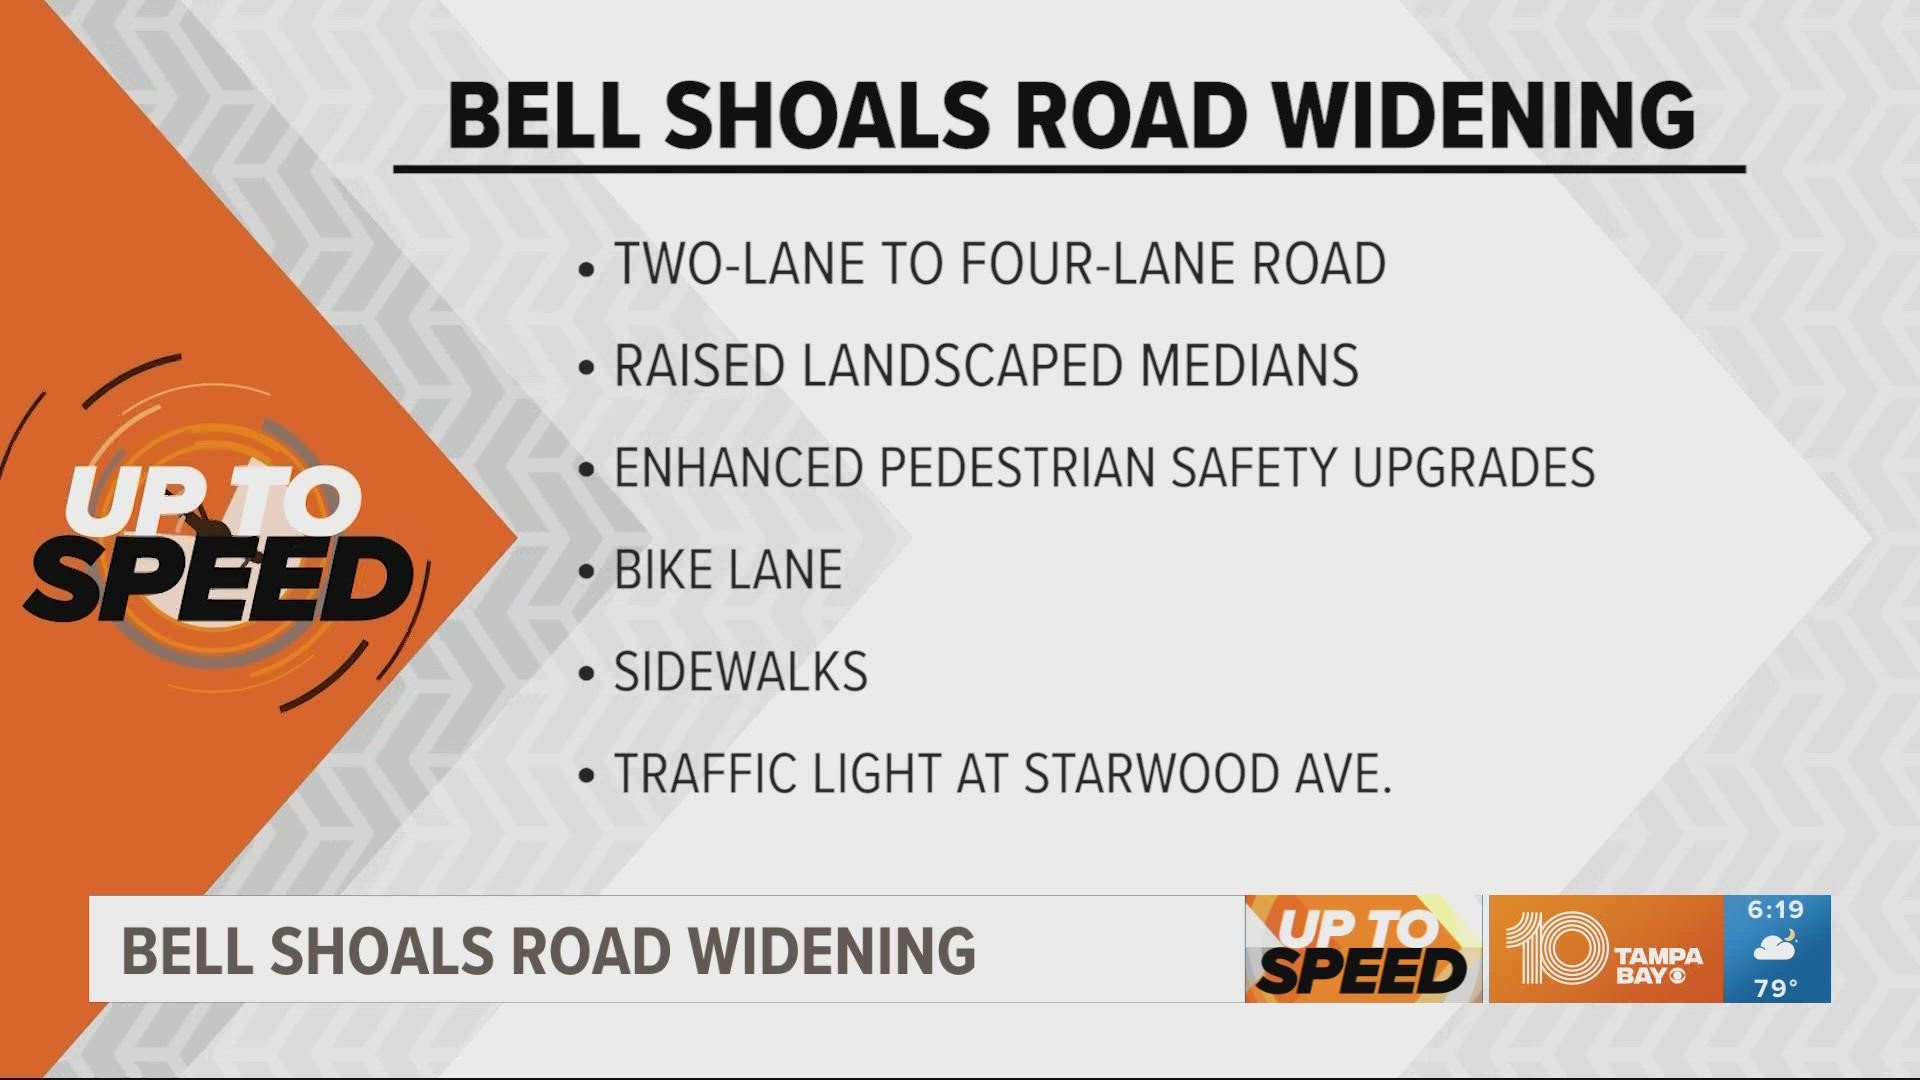 Bell Shoals is going from a two-lane to a four-lane road.